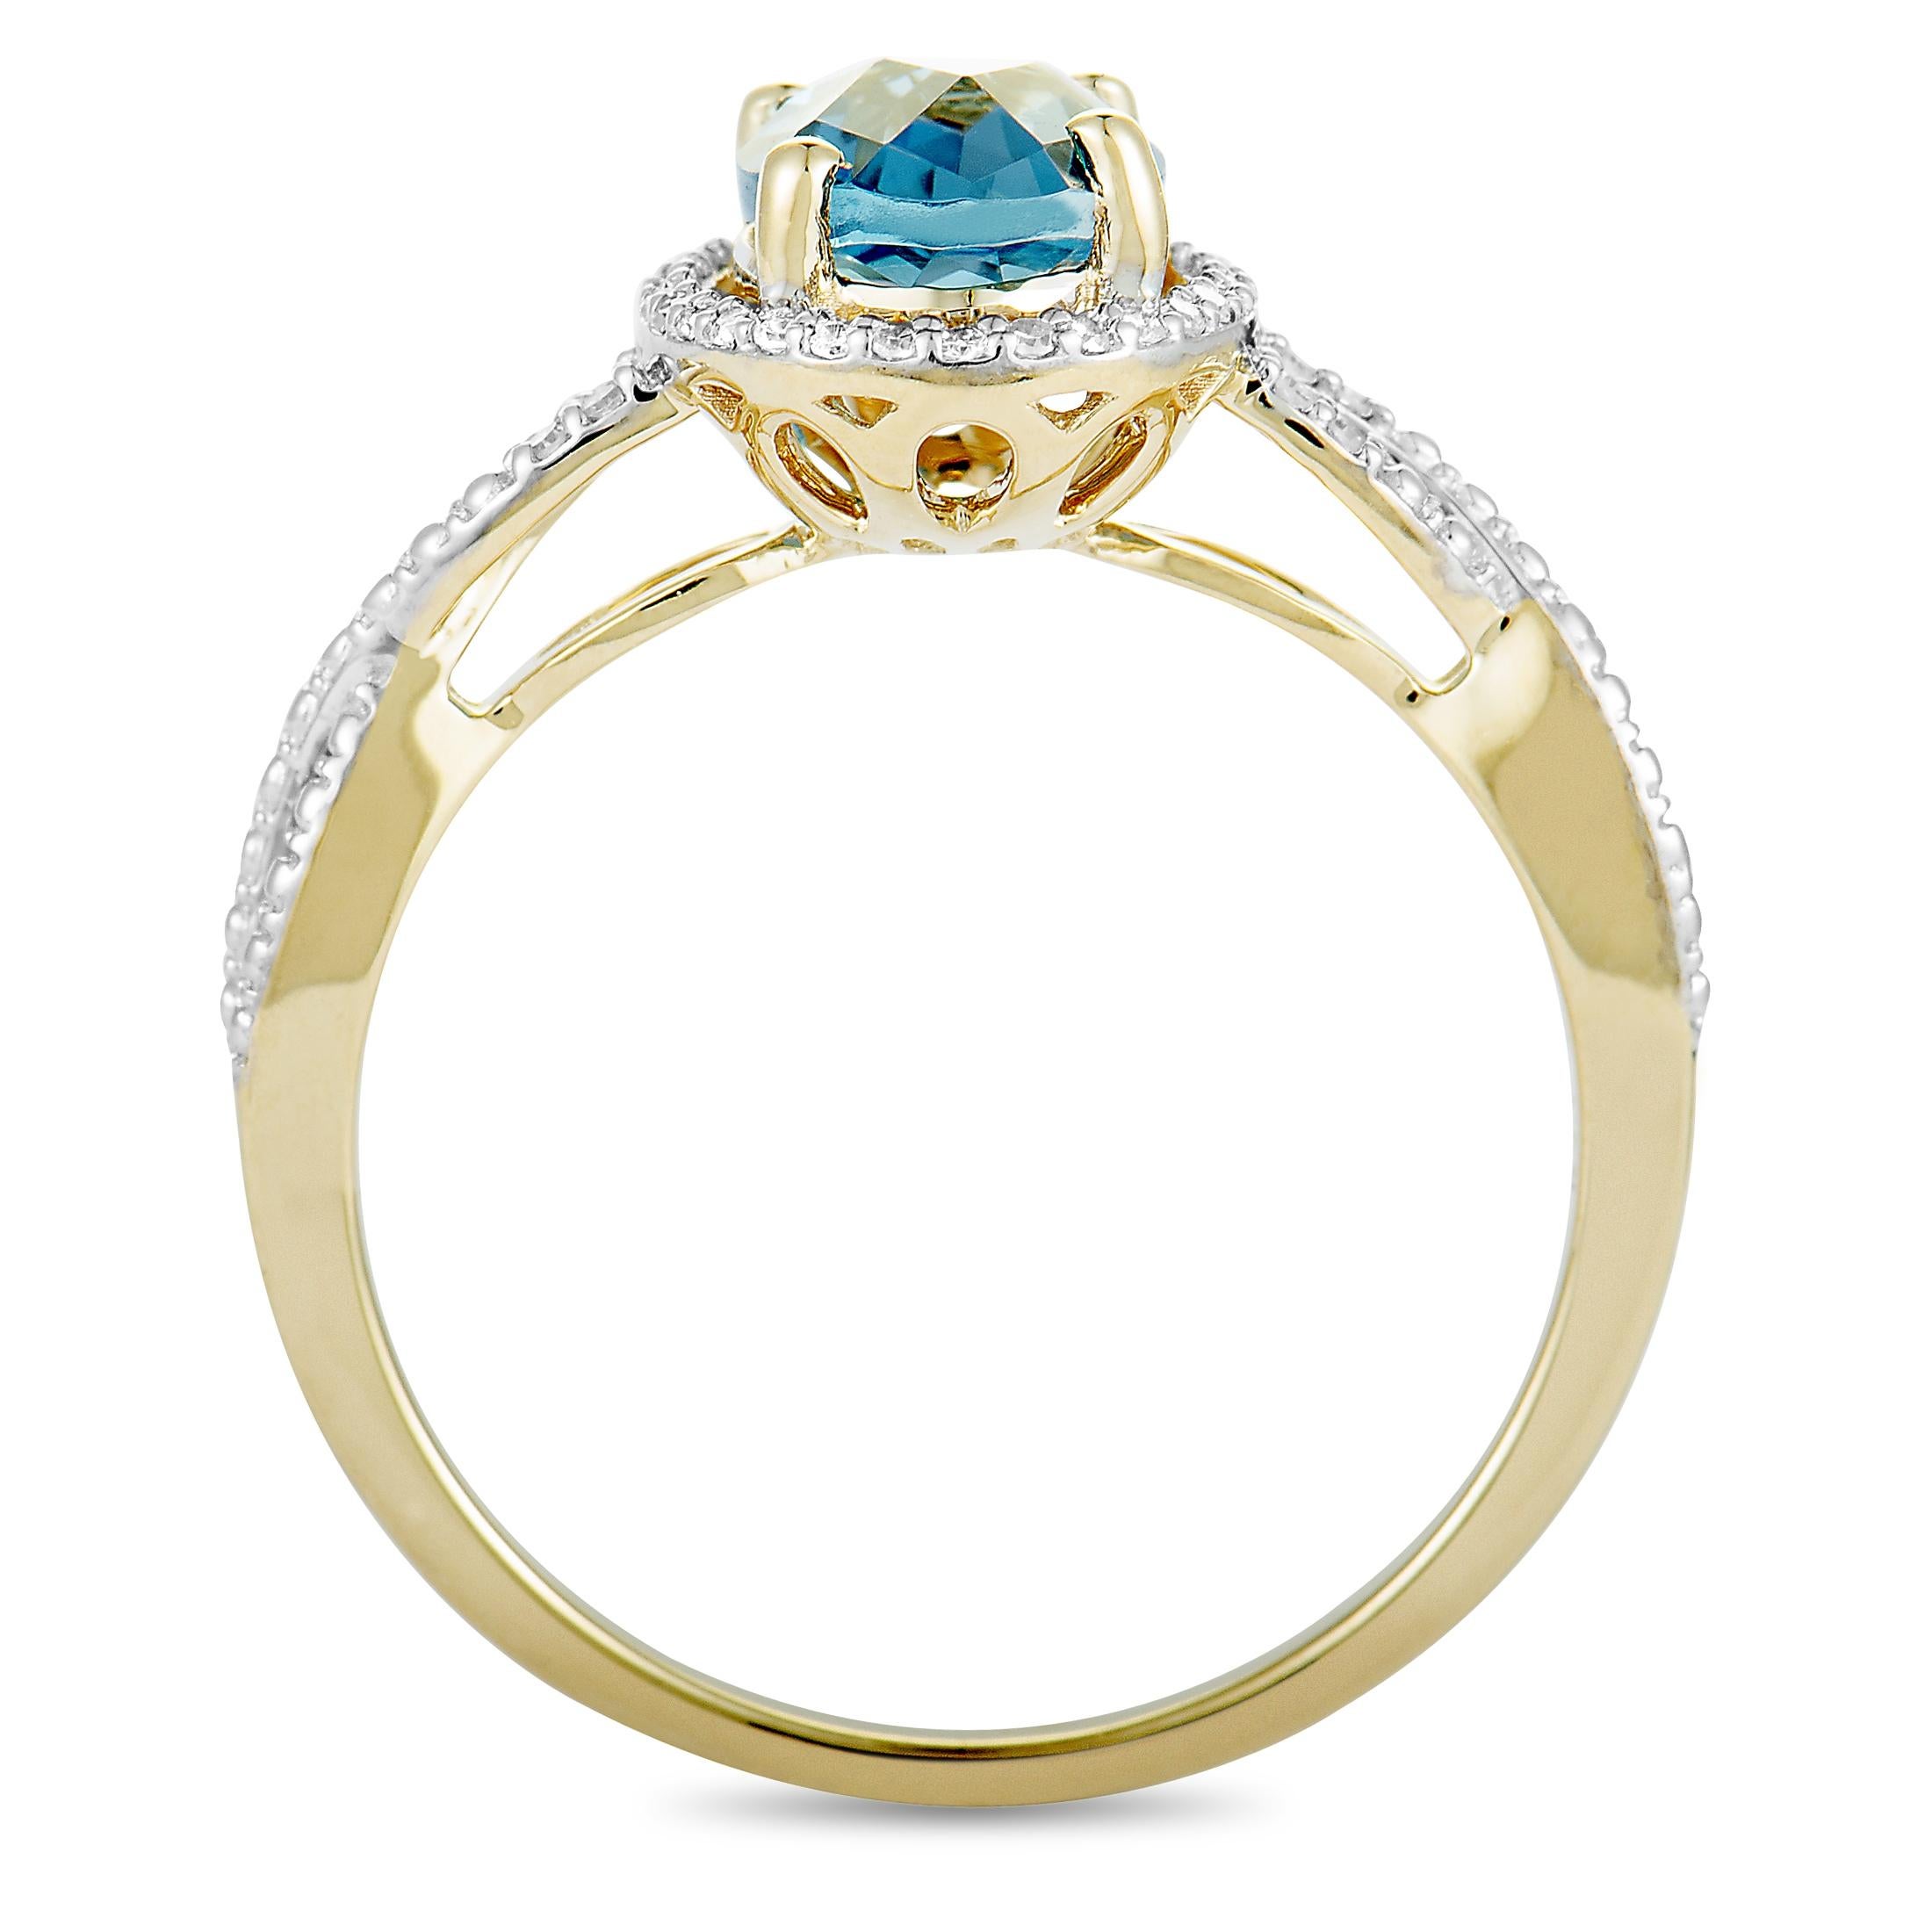 This ring is made of 14K yellow gold and weighs 2.9 grams. It is set with a London topaz and a total of 0.10 carats of diamonds. The ring boasts band thickness of 1 mm and top height of 7 mm, with top dimensions measuring 20 by 10 mm.
 
 Offered in